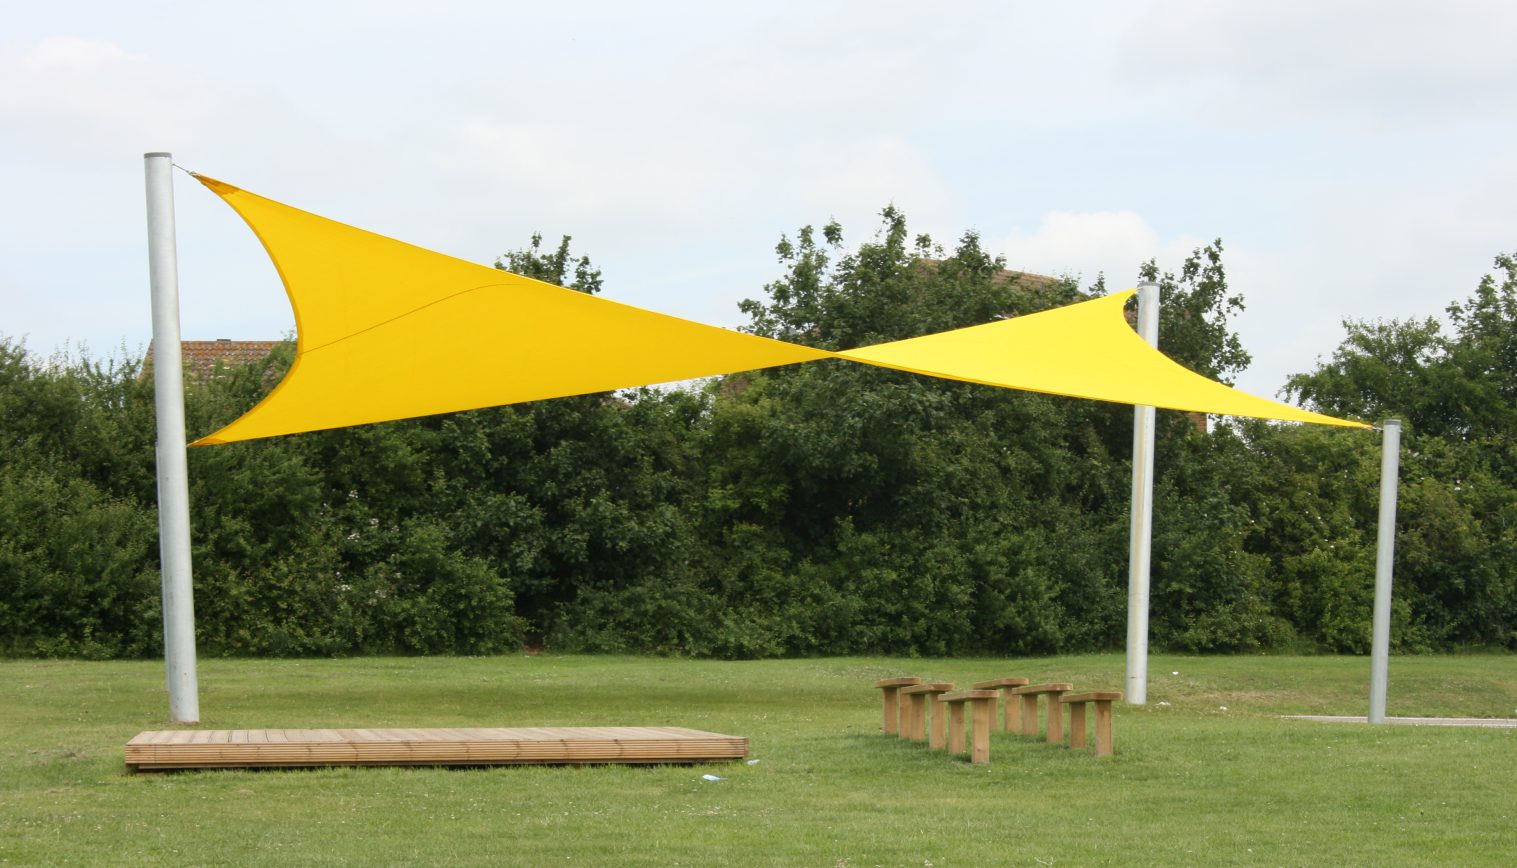 The Willows Primary School – Shade Sail Install